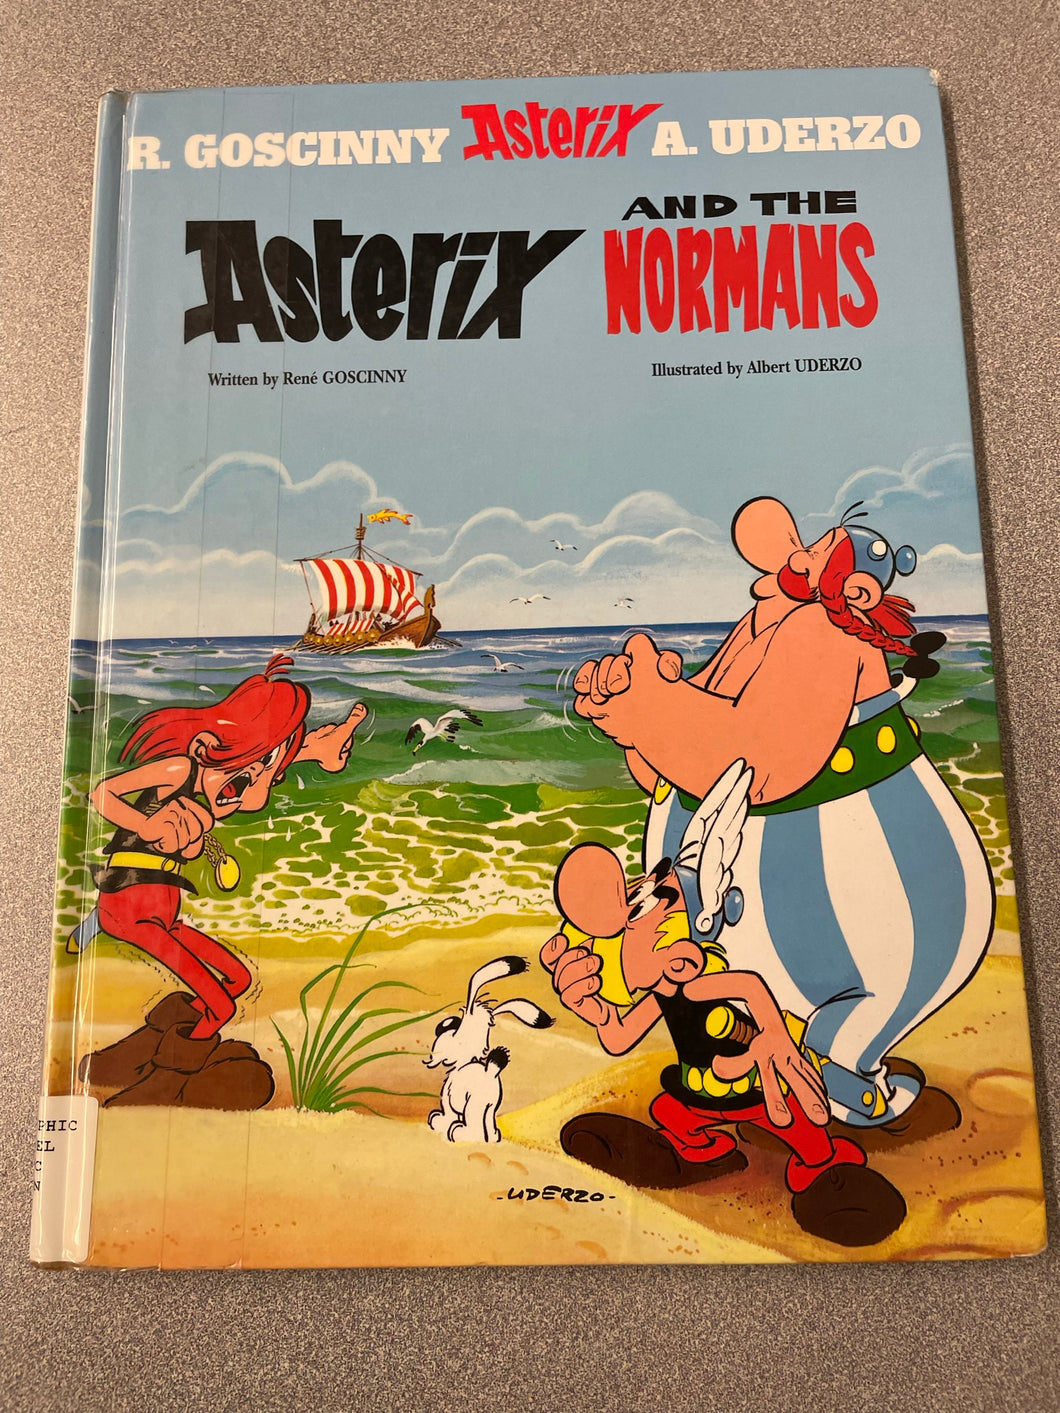 Asterix and the Normans, Rene Goscinny and Albert Uderzo 1967 GN